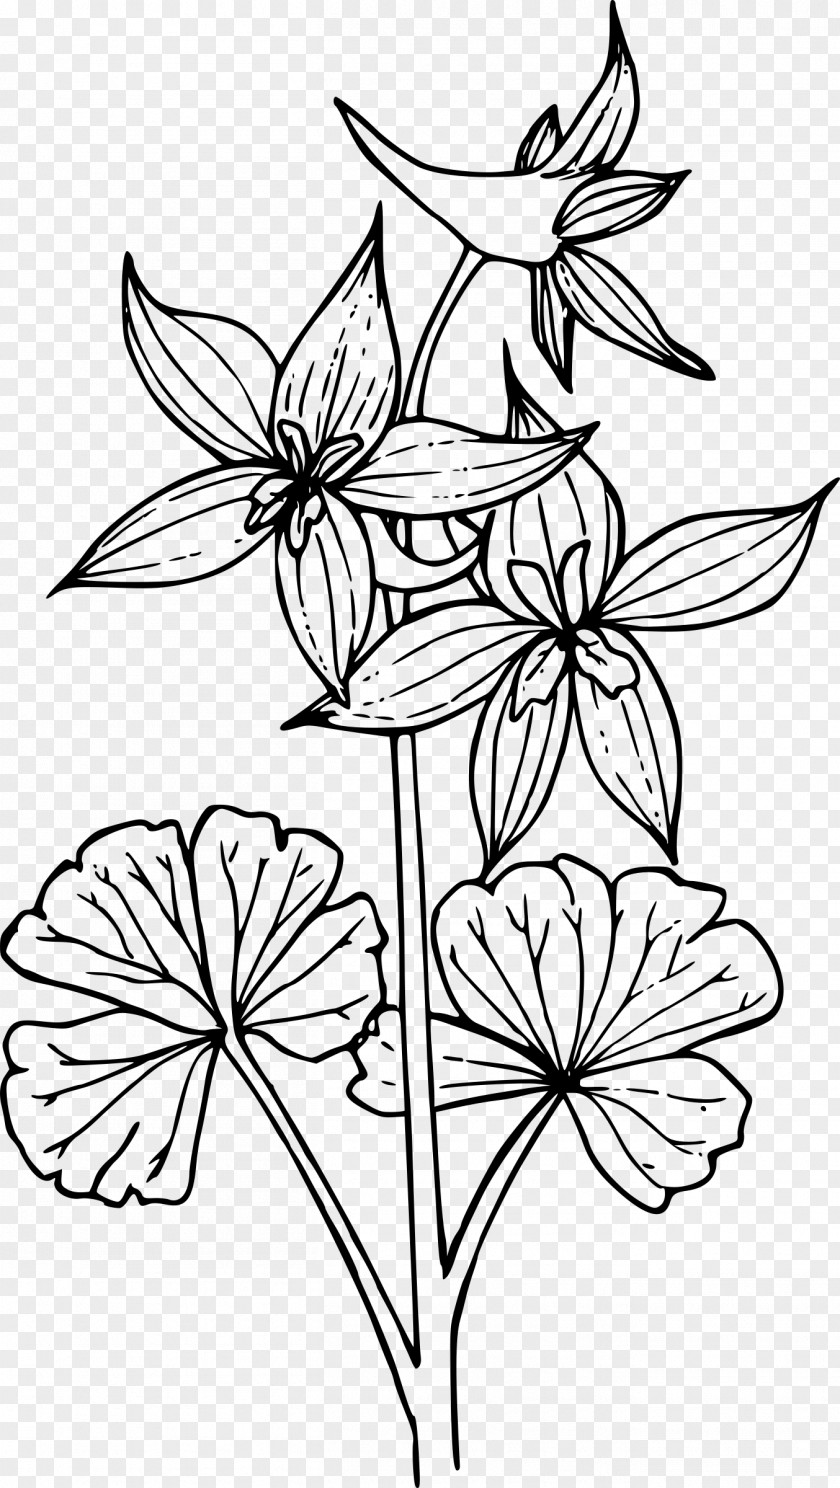 Style Herbaceous Plant Black And White Flower PNG